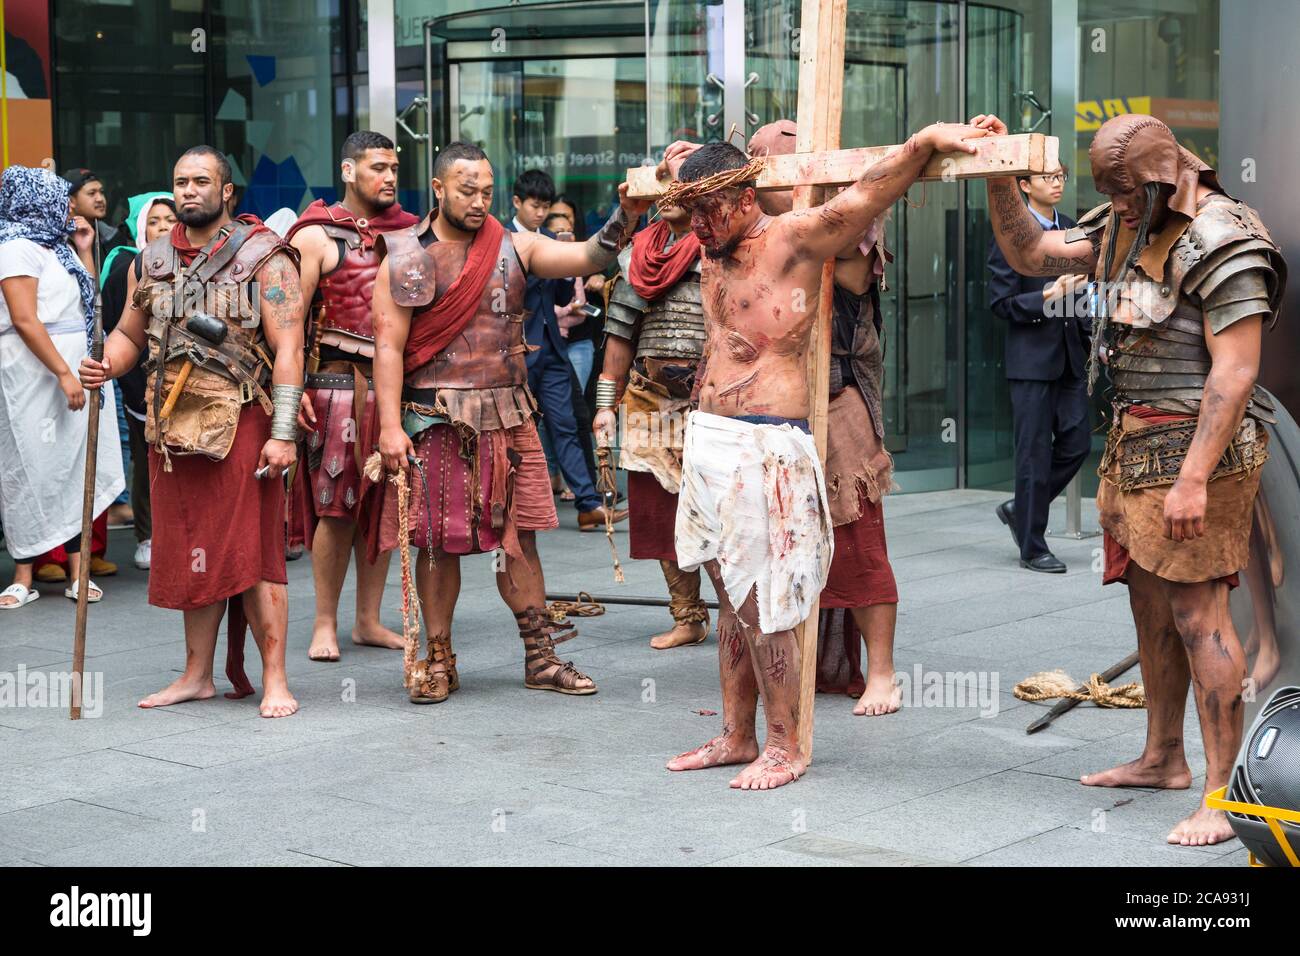 A reenactment of the crucifixion carried out by members of a Polynesian church dressed as Jesus and Roman soldiers. Auckland, New Zealand, 3/31/2018 Stock Photo